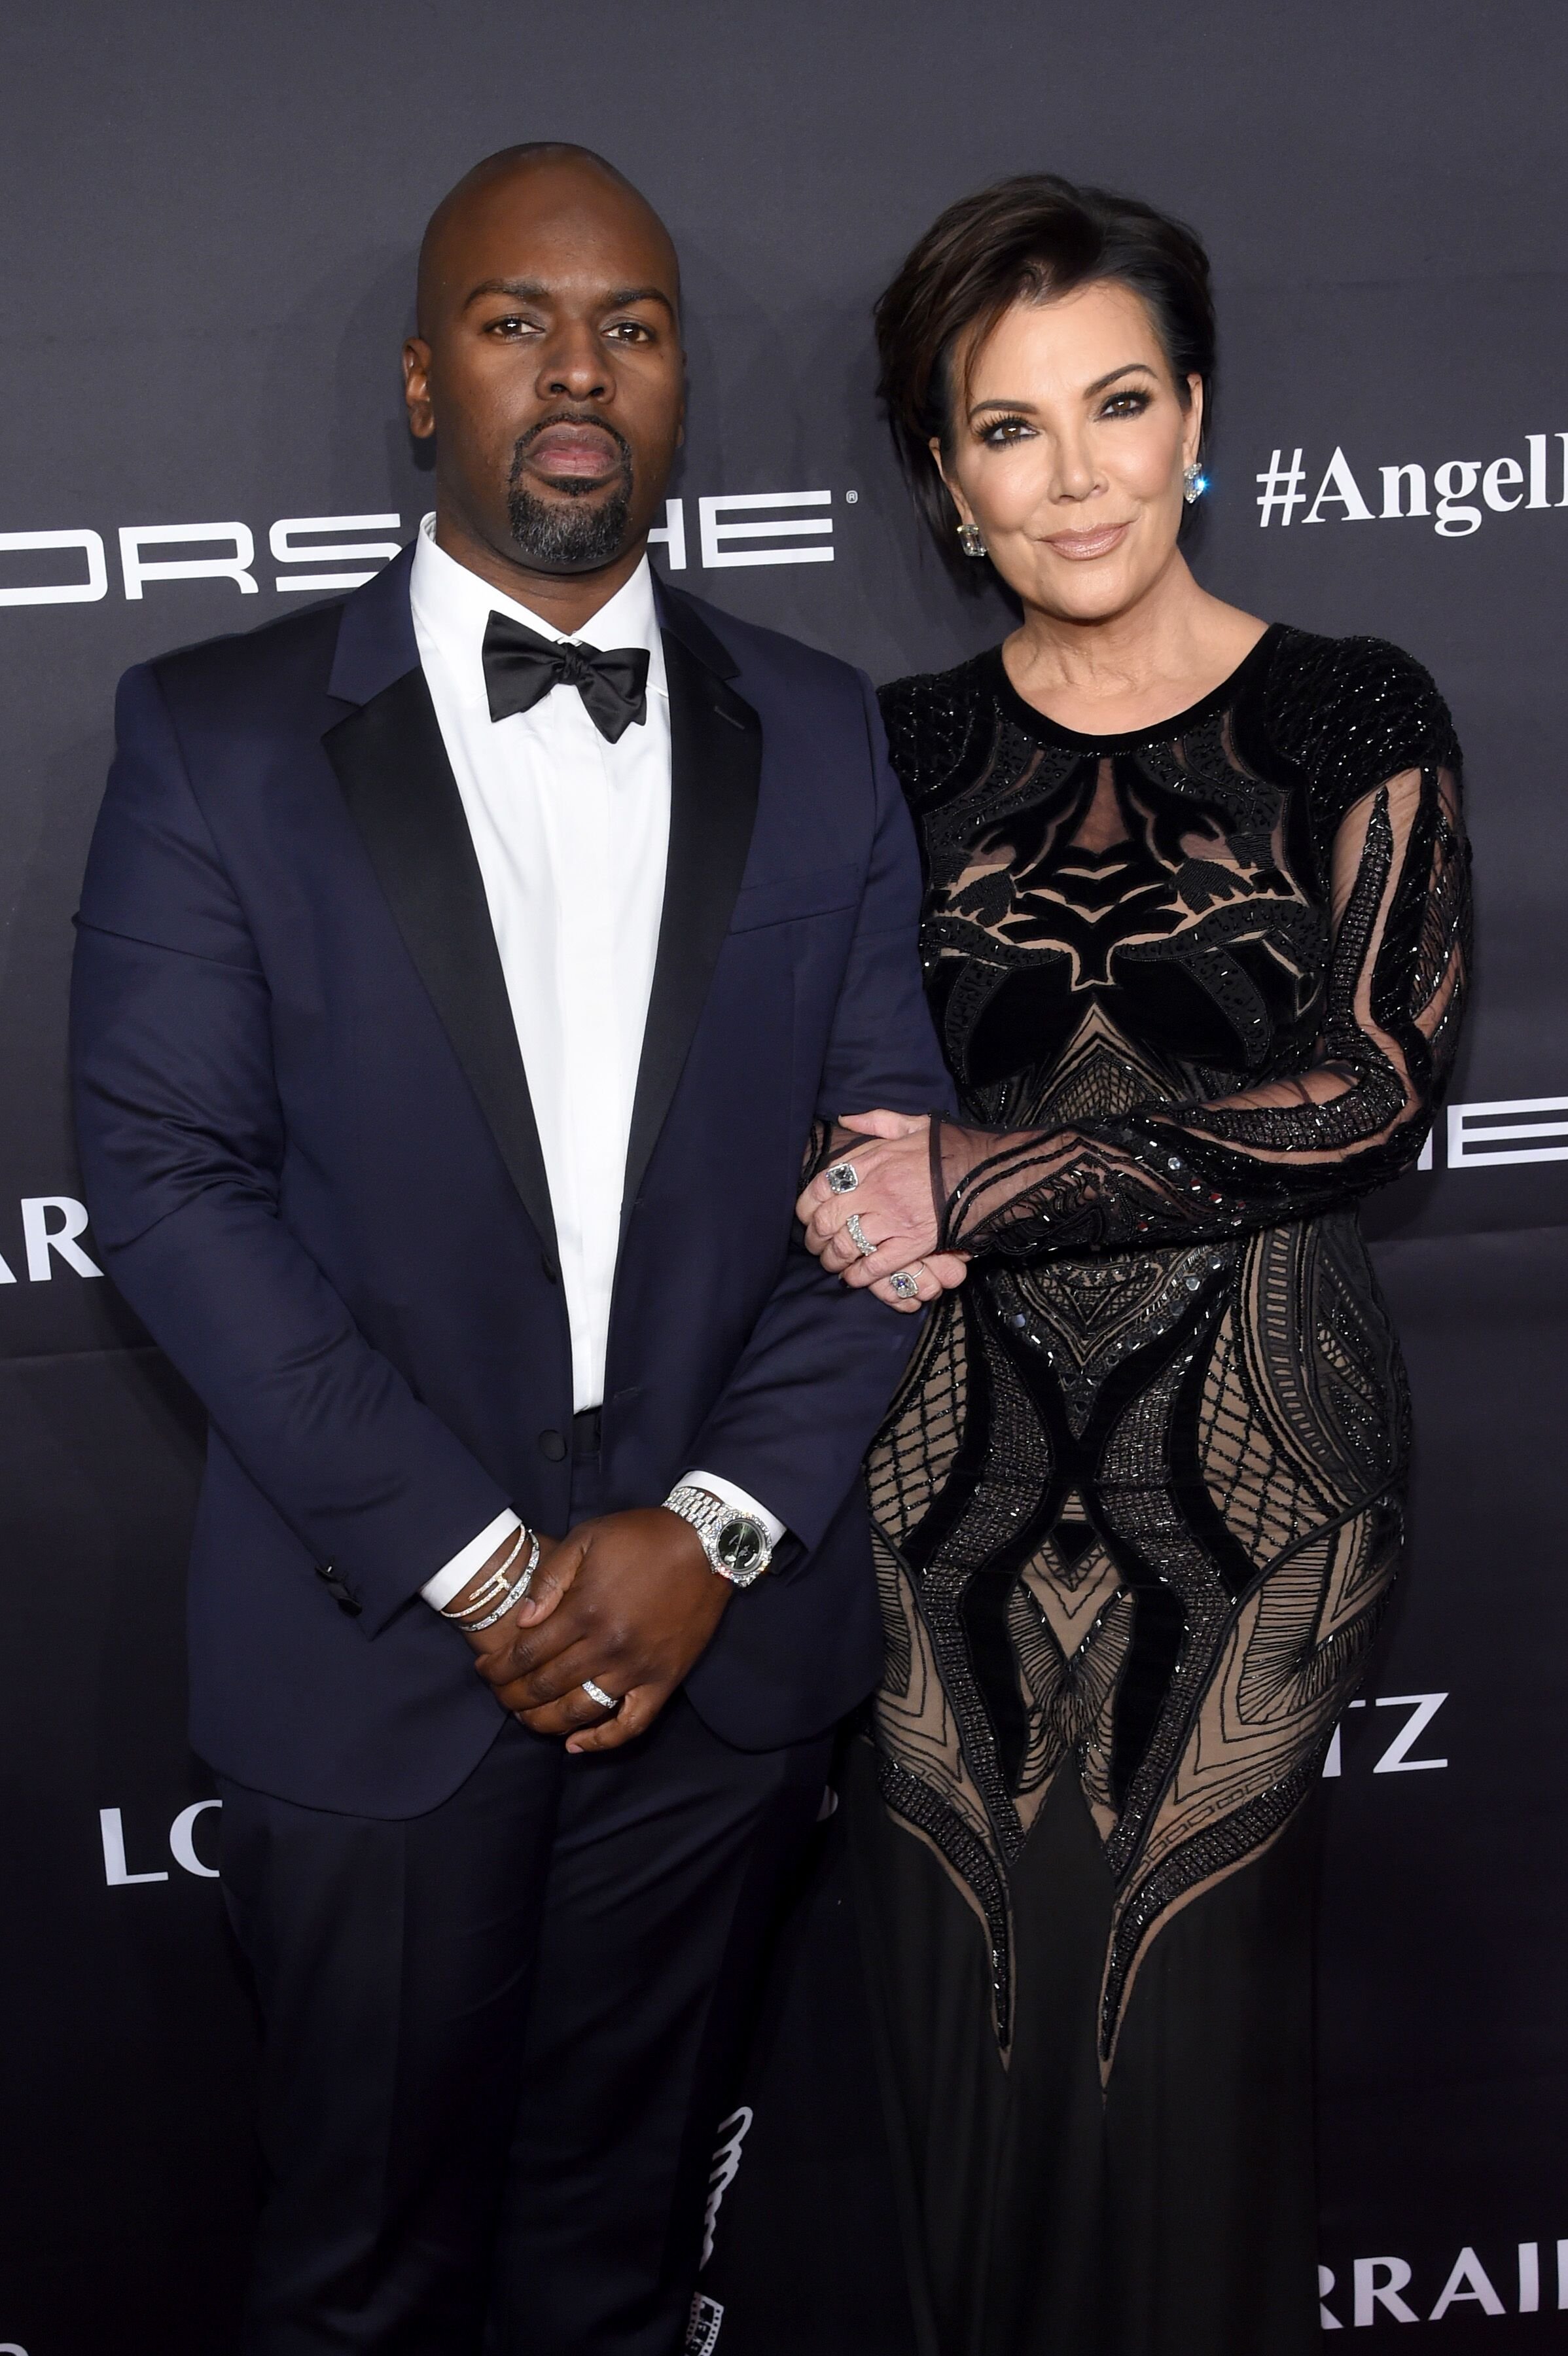 Kris Jenner and Corey Gamble attend the 2016 Angel Ball hosted by Gabrielle's Angel Foundation For Cancer Research on November 21, 2016 in New York City. | Source: Getty Images